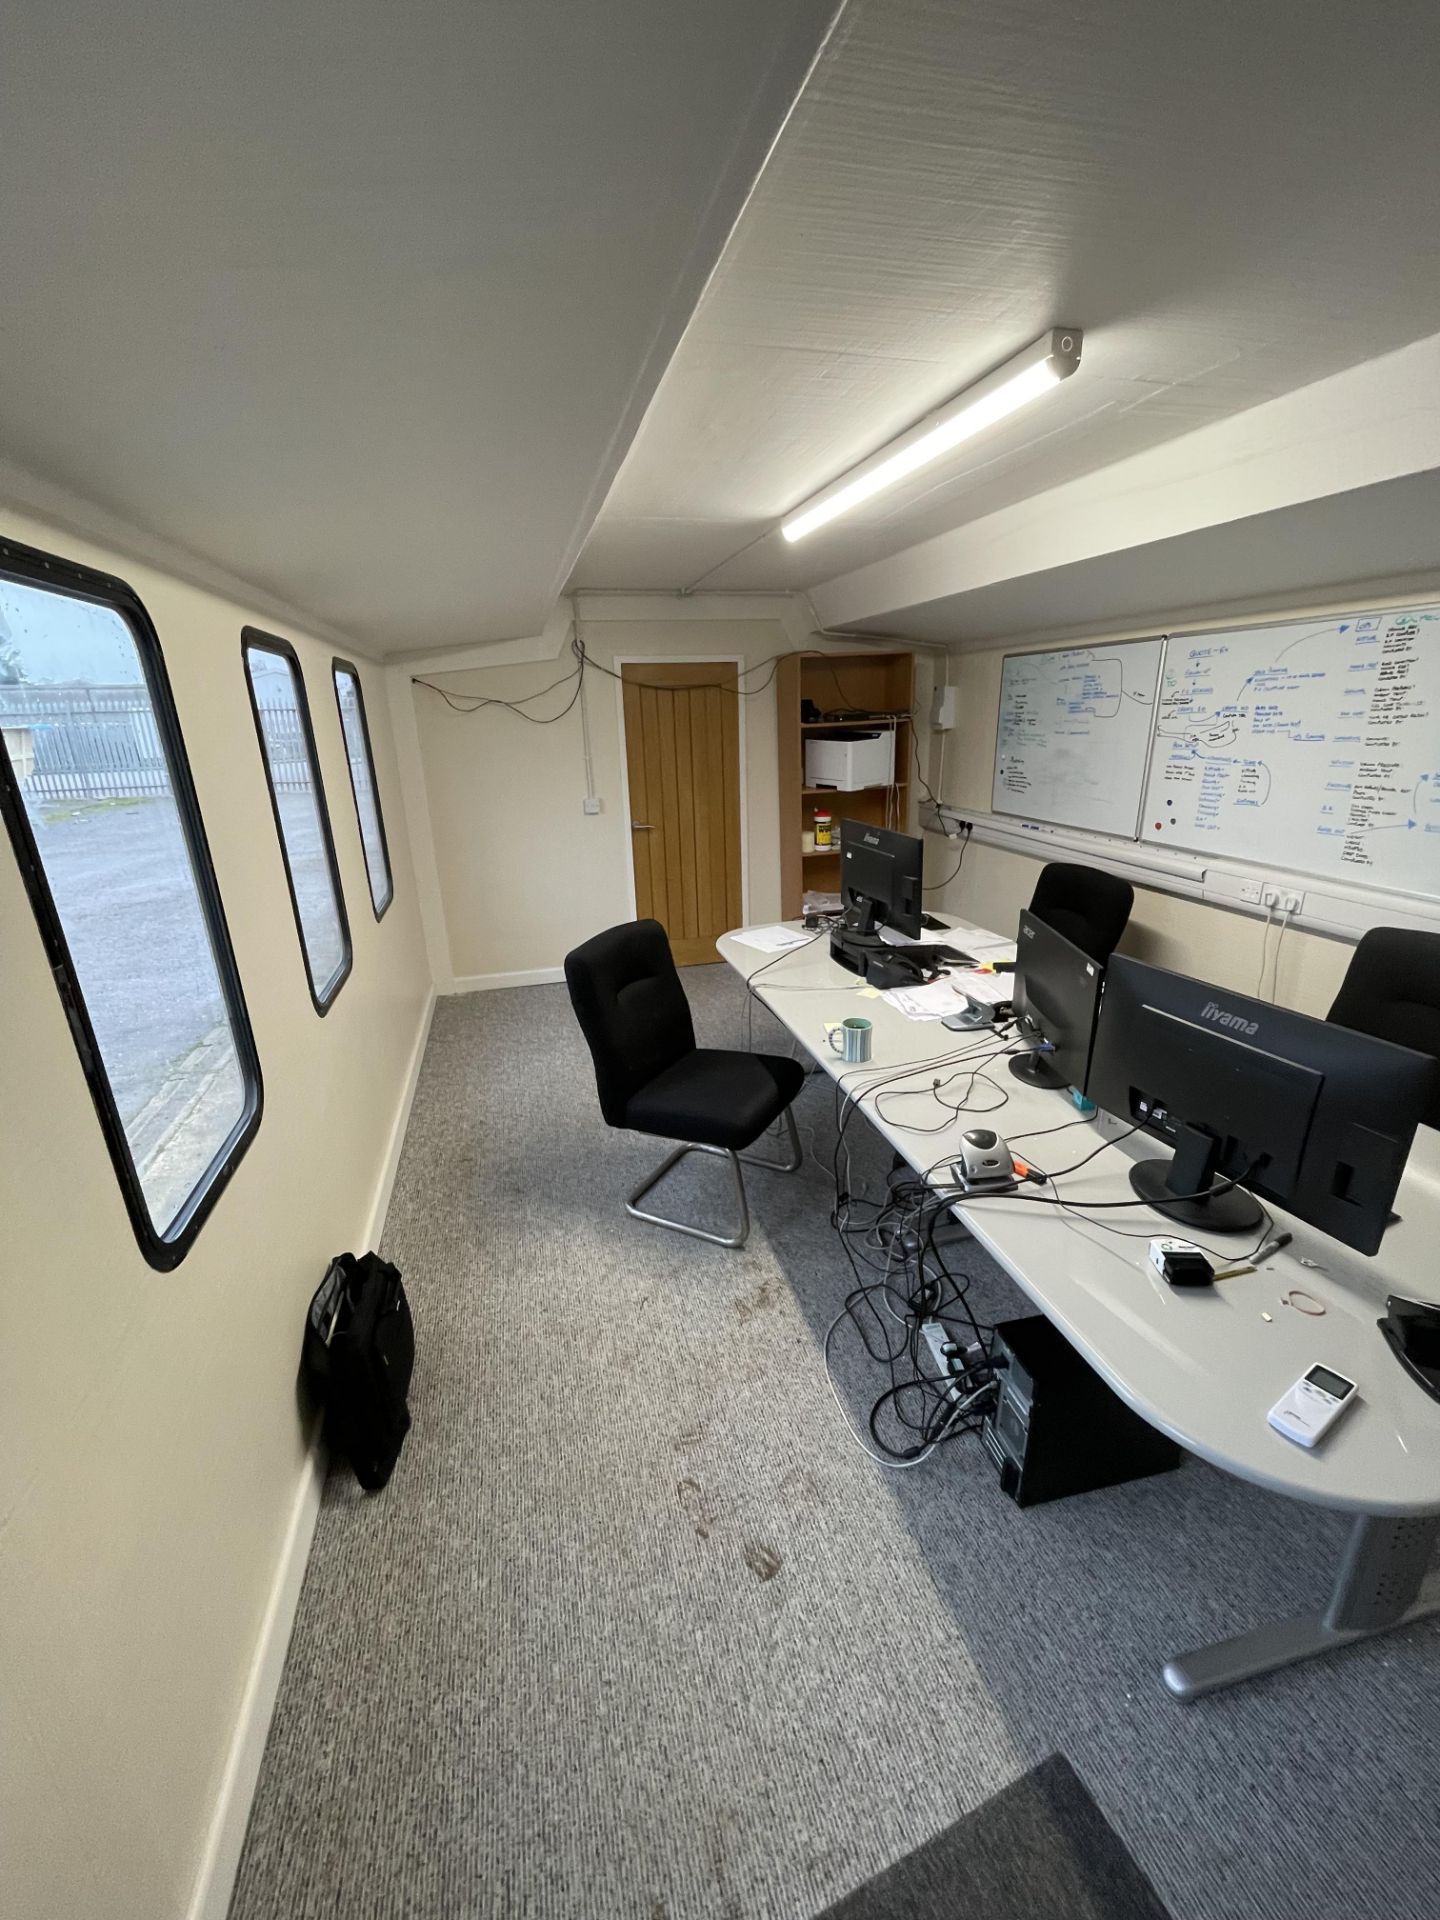 Marine Pod Cabin Office, Internal Measurements: 10.5x3.4x2.4m, Wired and Fitted with 2x Chigo MFR- - Image 6 of 13